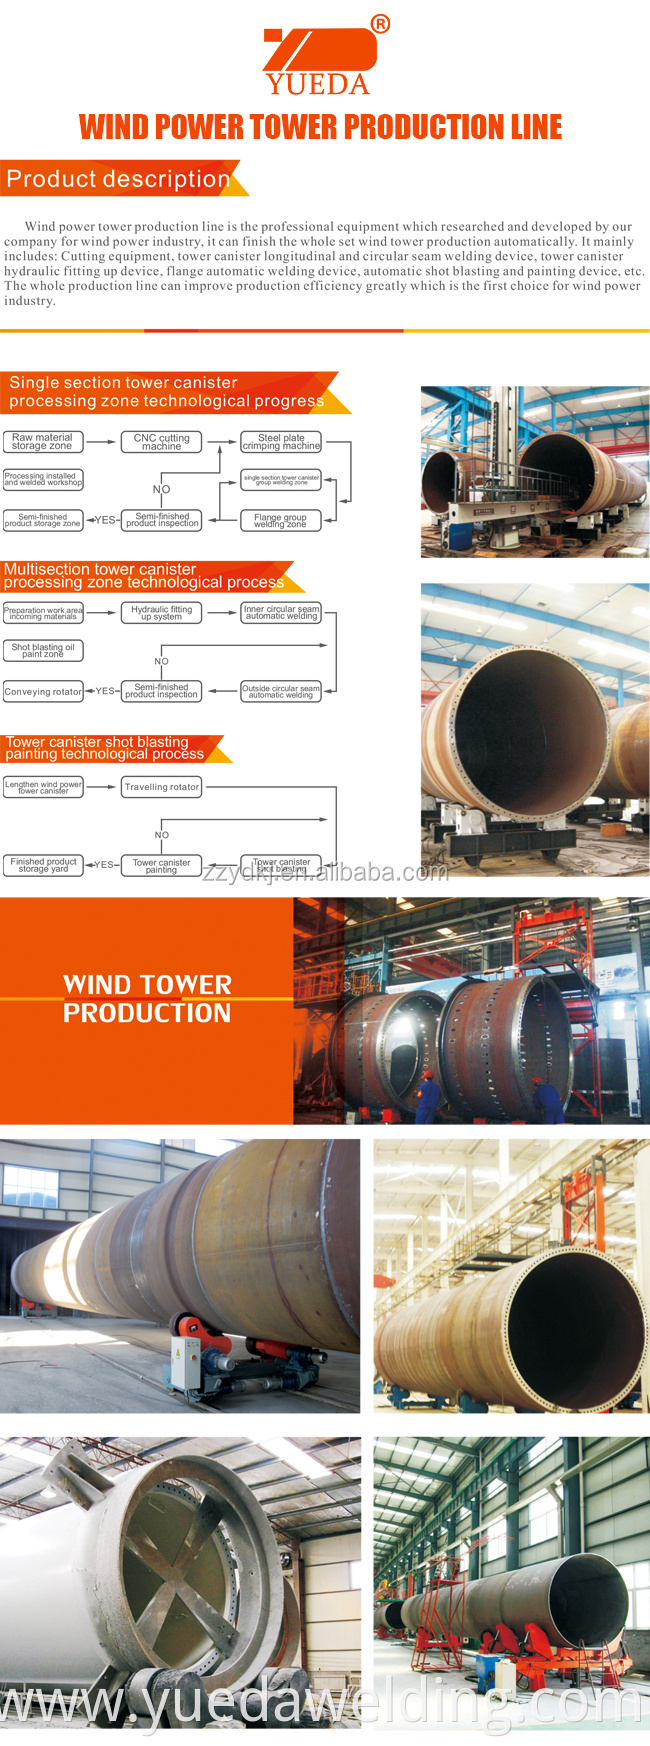 Yueda brand welding rod production line welding equipment for wind tower